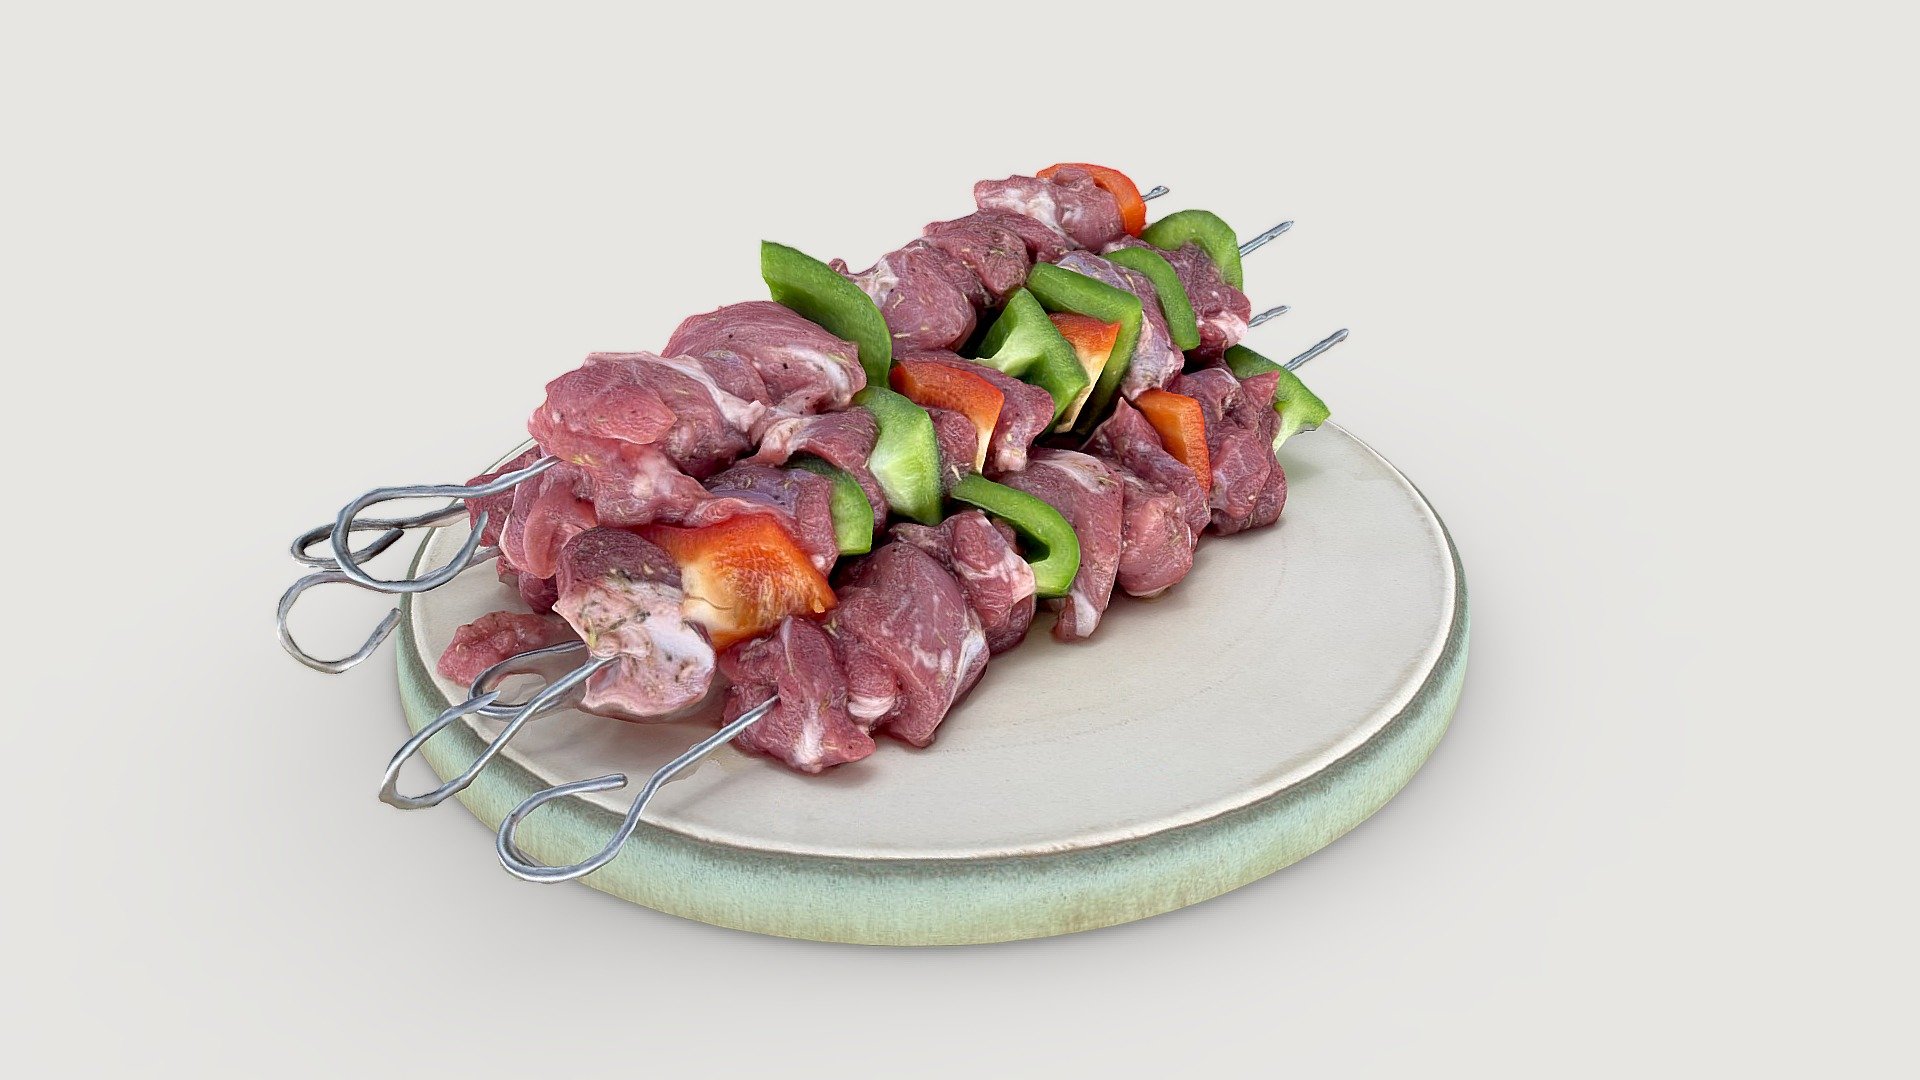 An ancient method of cooking meat. All you need is a stick and a fire. 

Check out my virtual and augmented reality recipes and support me on Patreon - Lamb skewers (shashlik) - 3D model by Zoltanfood 3d model